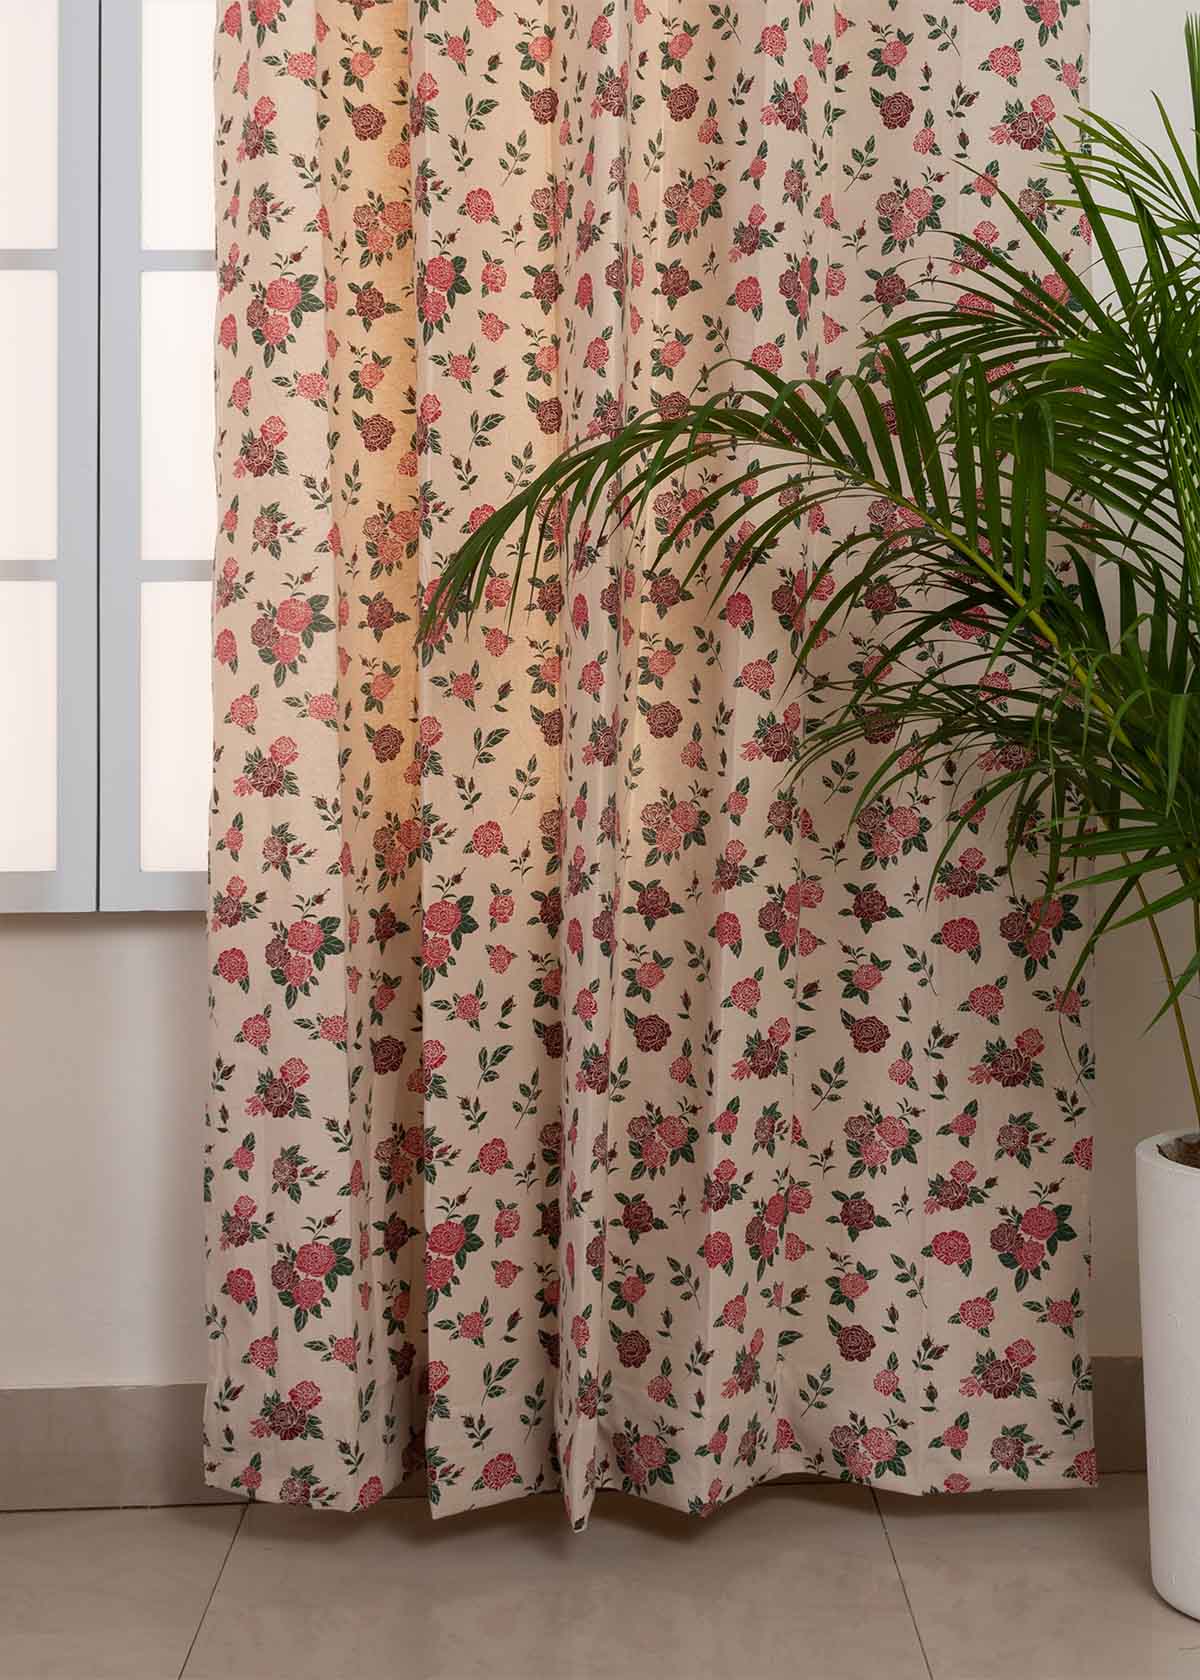 Wild Roses 100% Customizable Cotton floral curtain for Living room & bed room - Room darkening - Red